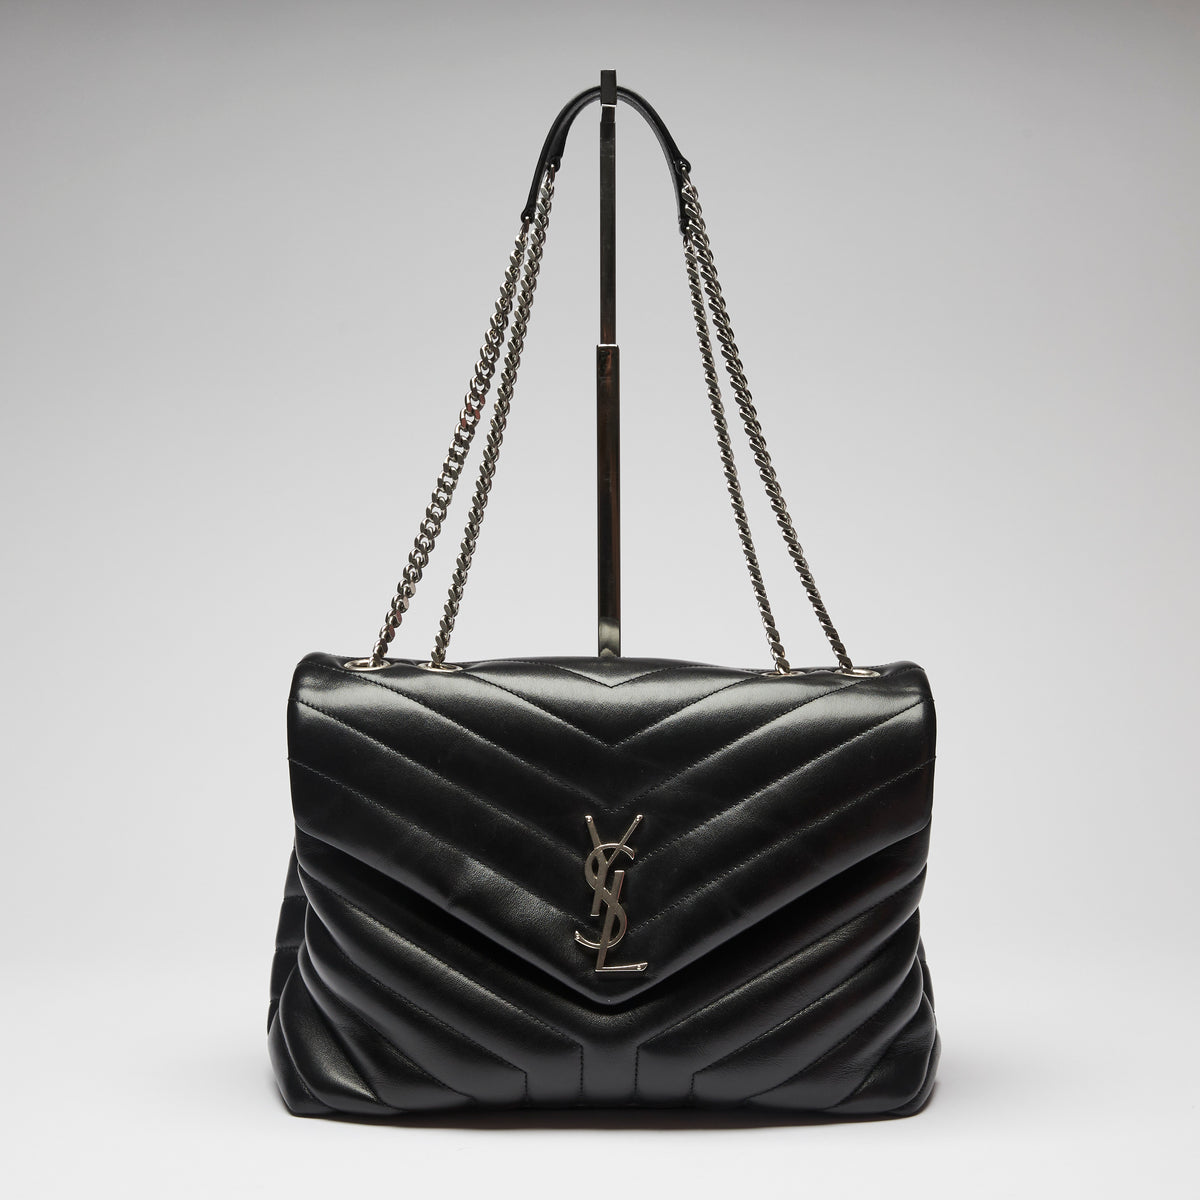 Excellent Pre-Loved Black Chevron Stitched Flap Bag with Shoulder Chain. (front)